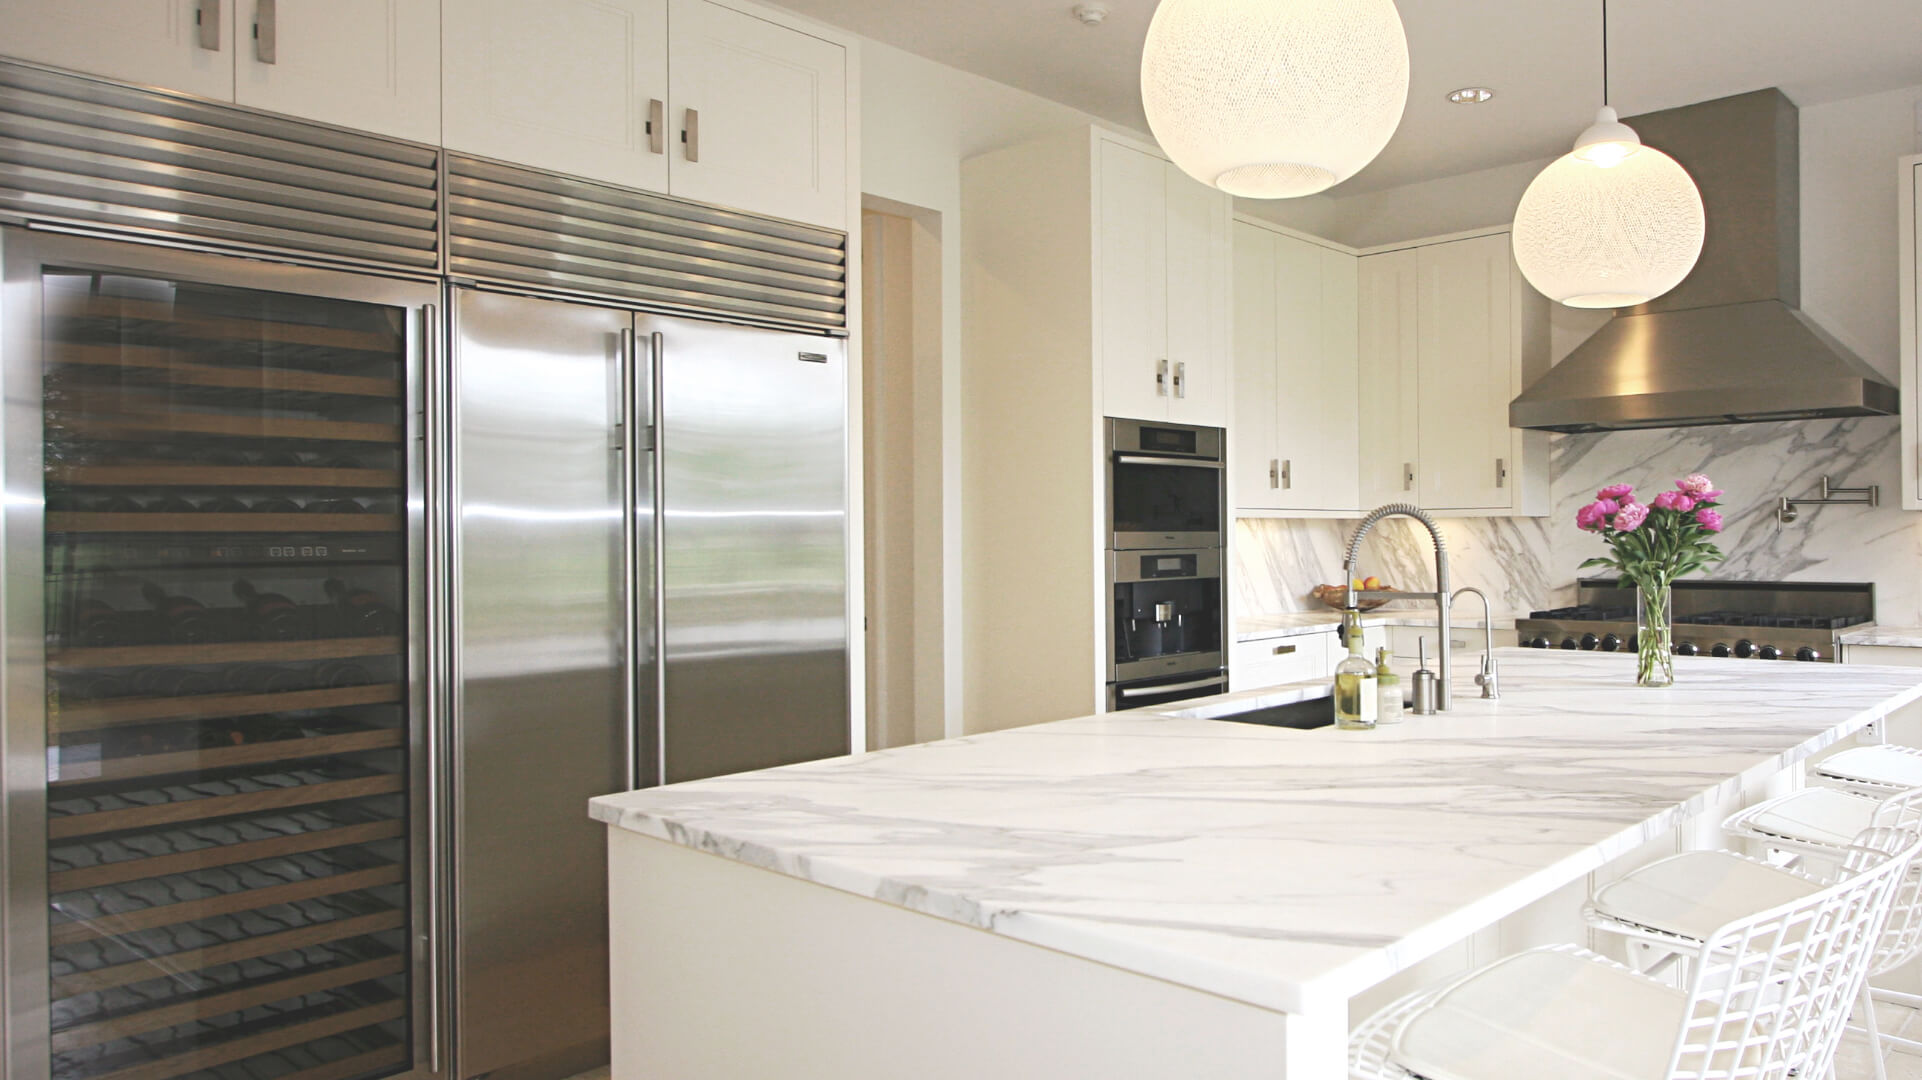 new orleans custom cabinetry & design | kitchens, bars, & more